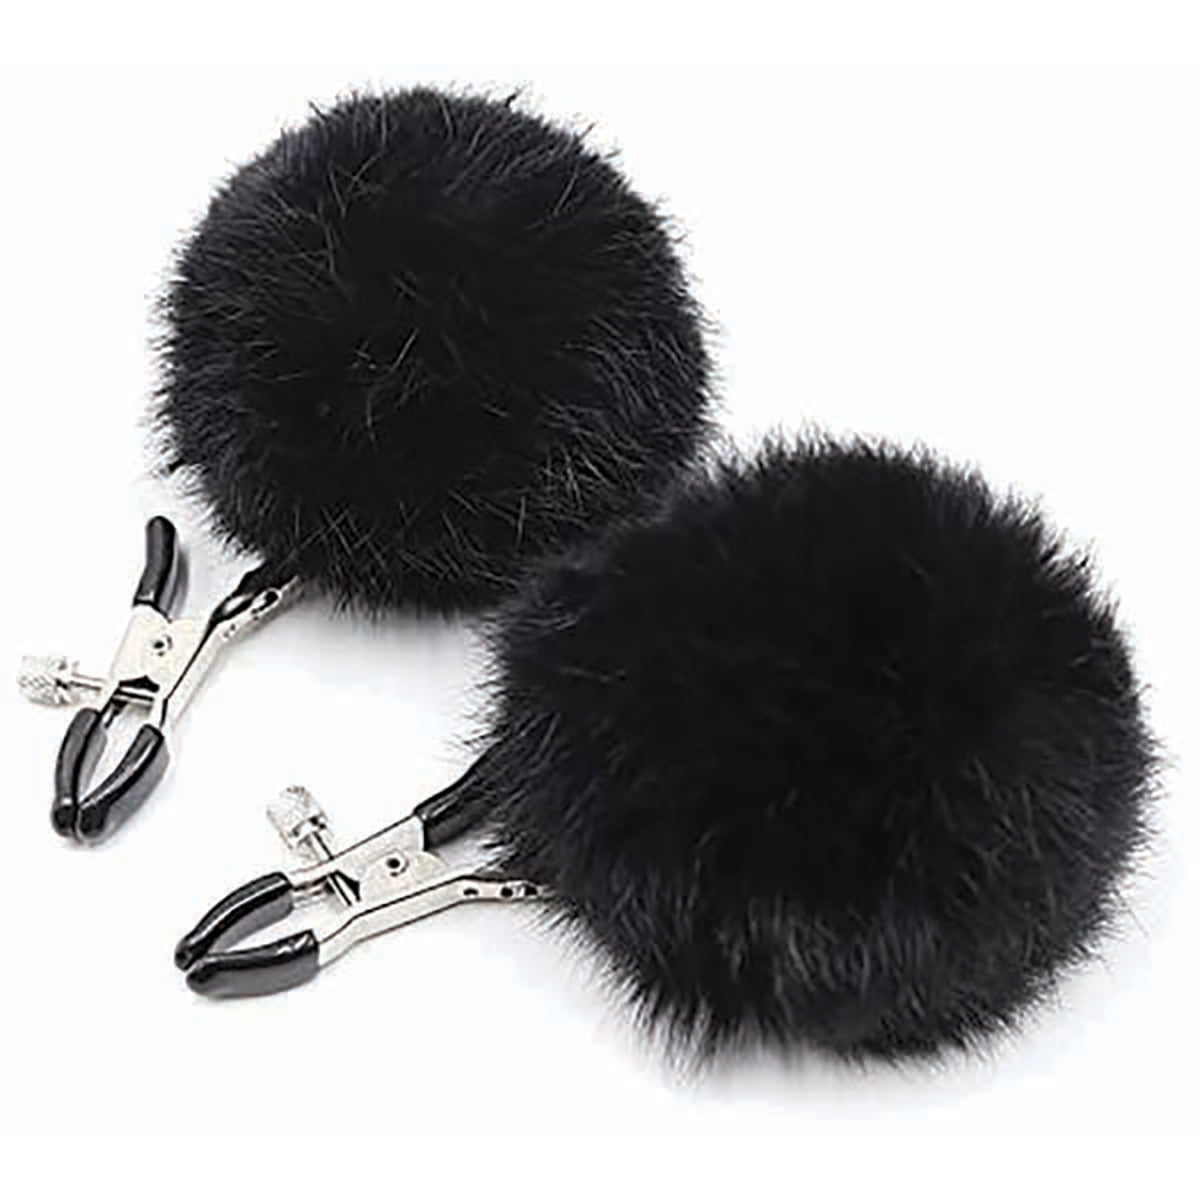 Sexy AF Puff Clamps - Black